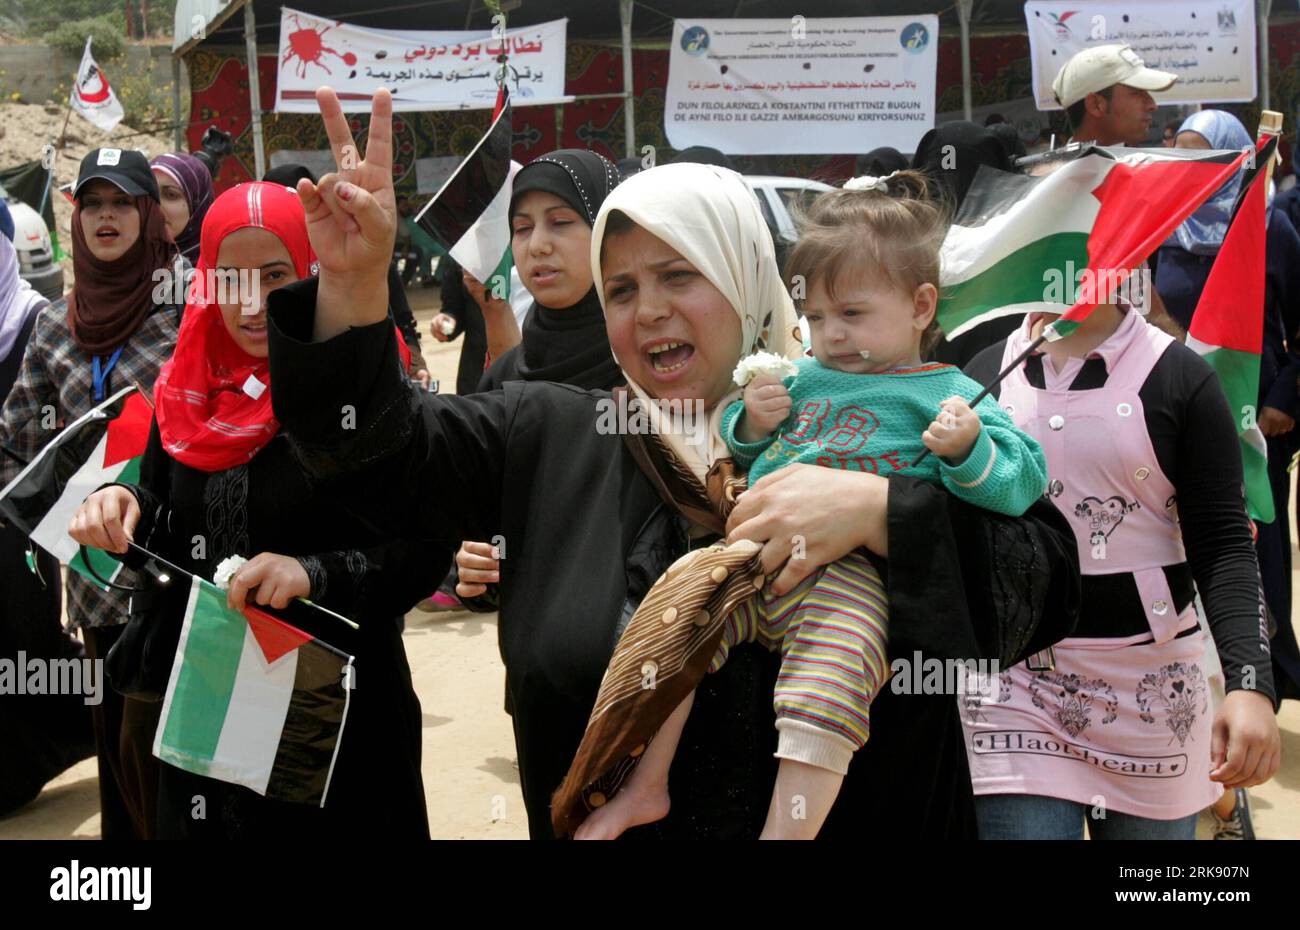 Bildnummer: 54096494  Datum: 01.06.2010  Copyright: imago/Xinhua (100601) -- GAZA, June 1, 2010 (Xinhua) -- Palestinian women take part in anti-Israel protest in Gaza, June 1, 2010. A general strike on Tuesday dominated the West Bank and Gaza Strip in support for the victims of the Freedom Flotilla, which was attacked and seized by the Israeli army on its way to the enclave s shores on Monday. (Xinhua/Yasser Qudih) (wh) GAZA-PROTEST-ISRAELI ATTACK-VICTIMS-MOURNING PUBLICATIONxNOTxINxCHN Gesellschaft Politik Demo Protest Angriff Schiffsangriff Hilfsflotte Hilfskonvoi Konvoi Palästina Israel Pre Stock Photo